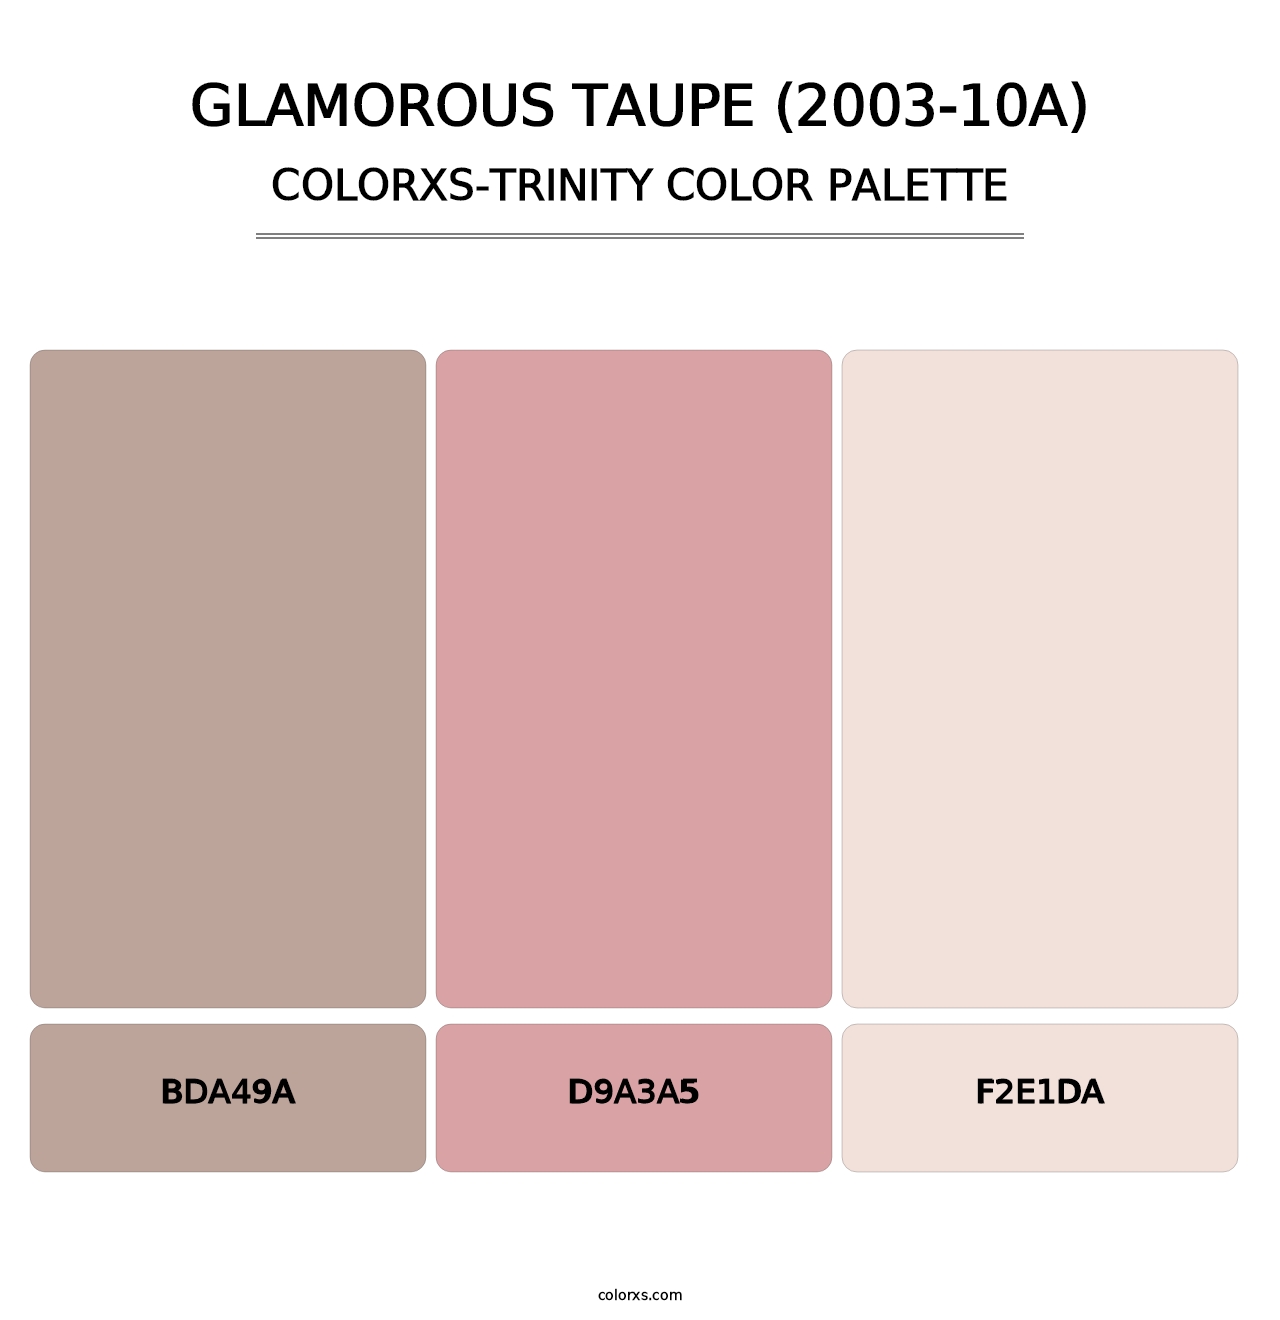 Glamorous Taupe (2003-10A) - Colorxs Trinity Palette